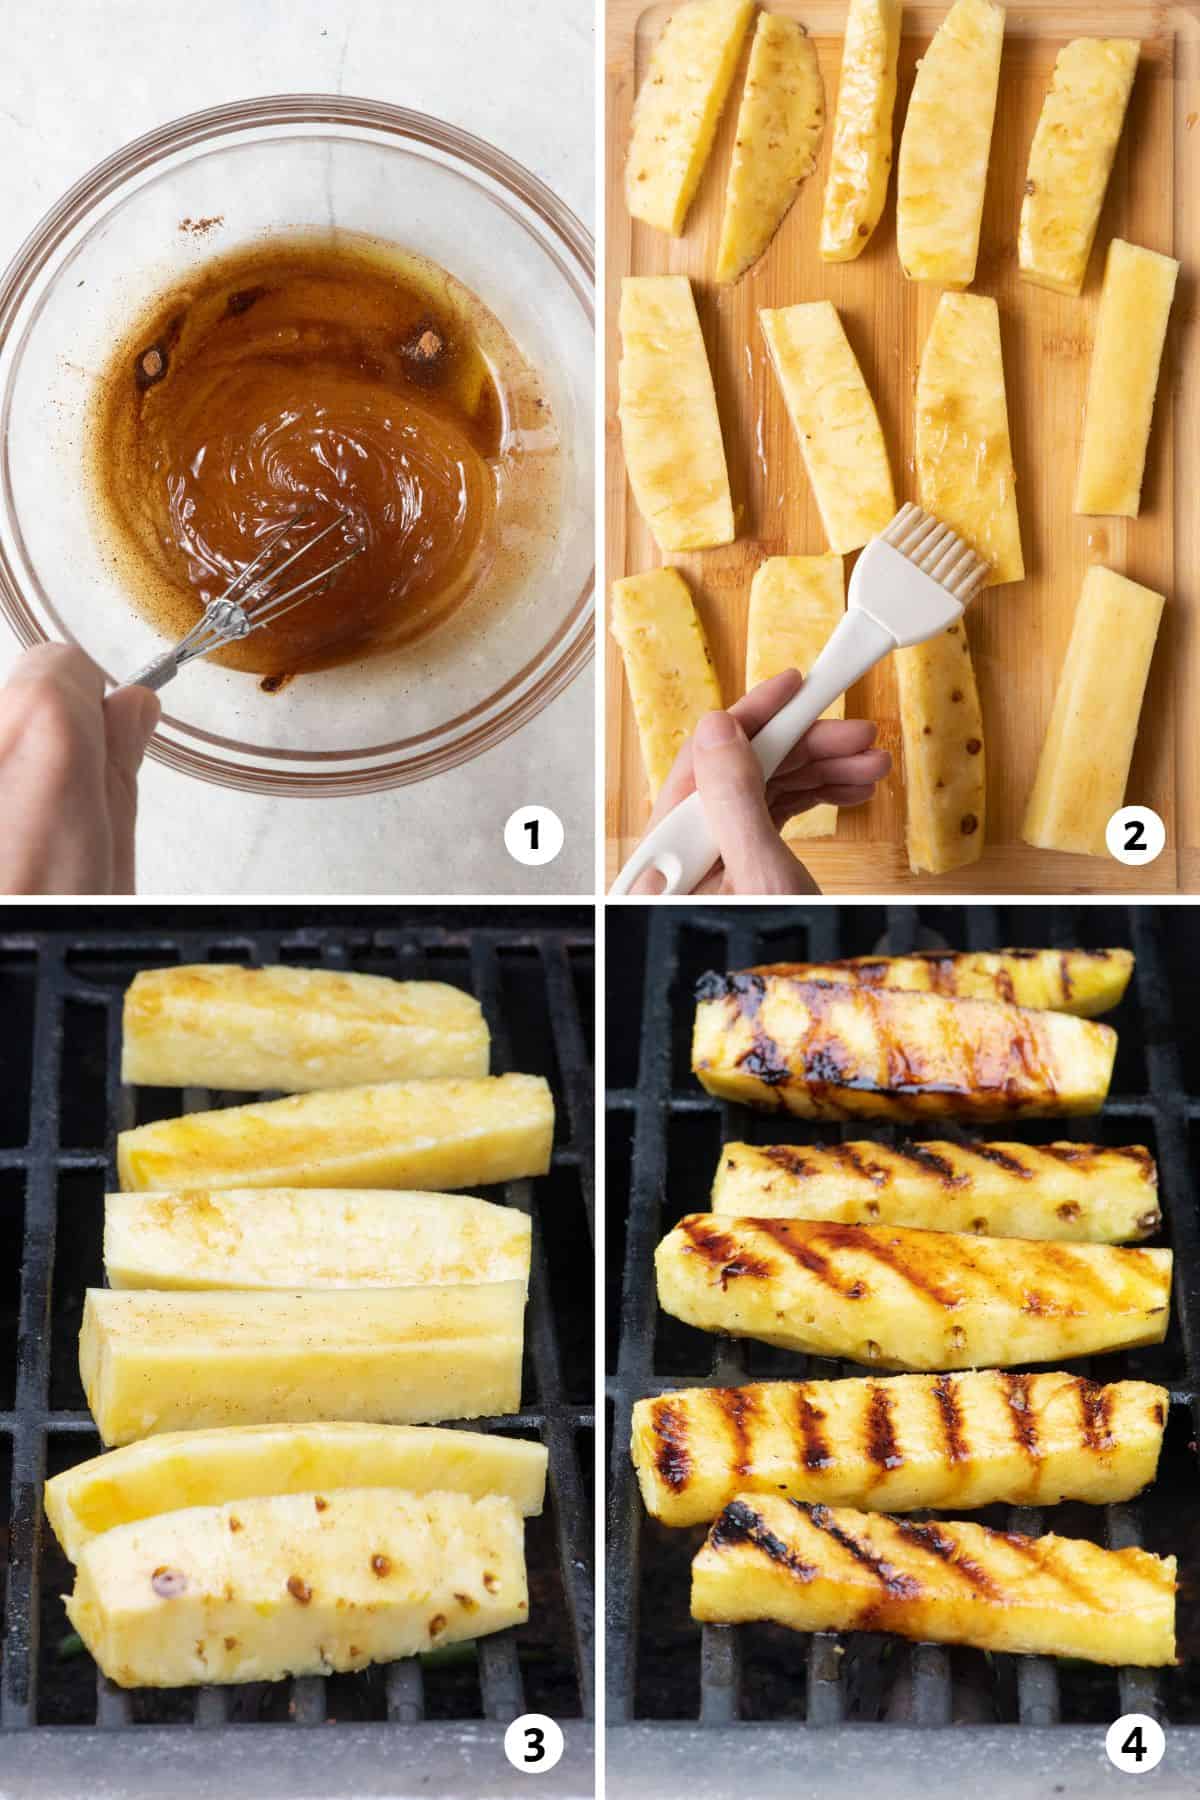 4 image collage making recipe: 1- whisking together honey, cinnamon and oil in a bowl, 2- brushing pineapple spears with honey mixture on a cutting board, 3- honey glazed pineapple spears on a grill, and 4- after flipping to show grill marks.